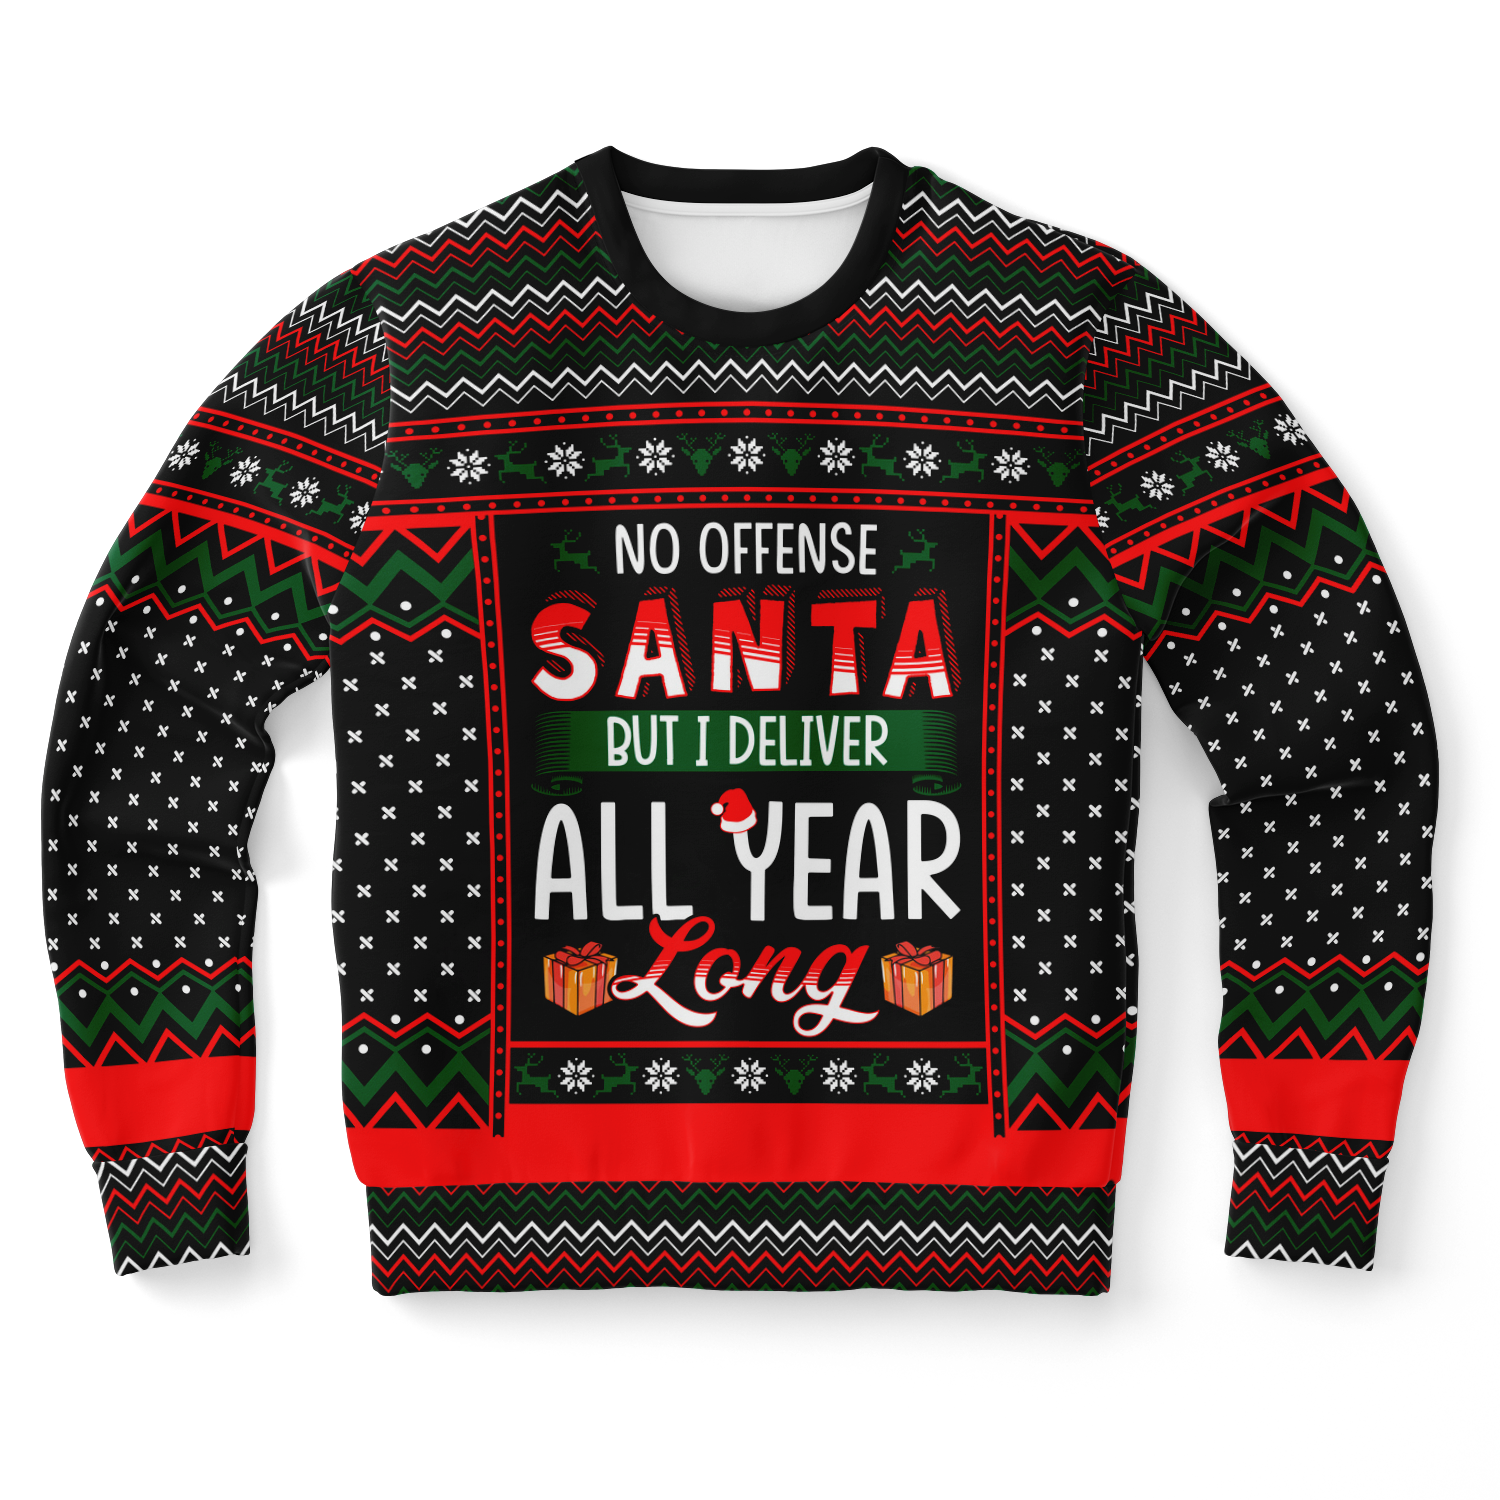 I Deliver All Year Long Christmas Sweatshirt | Unisex Ugly Christmas Sweater, Xmas Sweater, Holiday Sweater, Festive Sweater, Funny Redhead Sweater, Funny Party Shirt